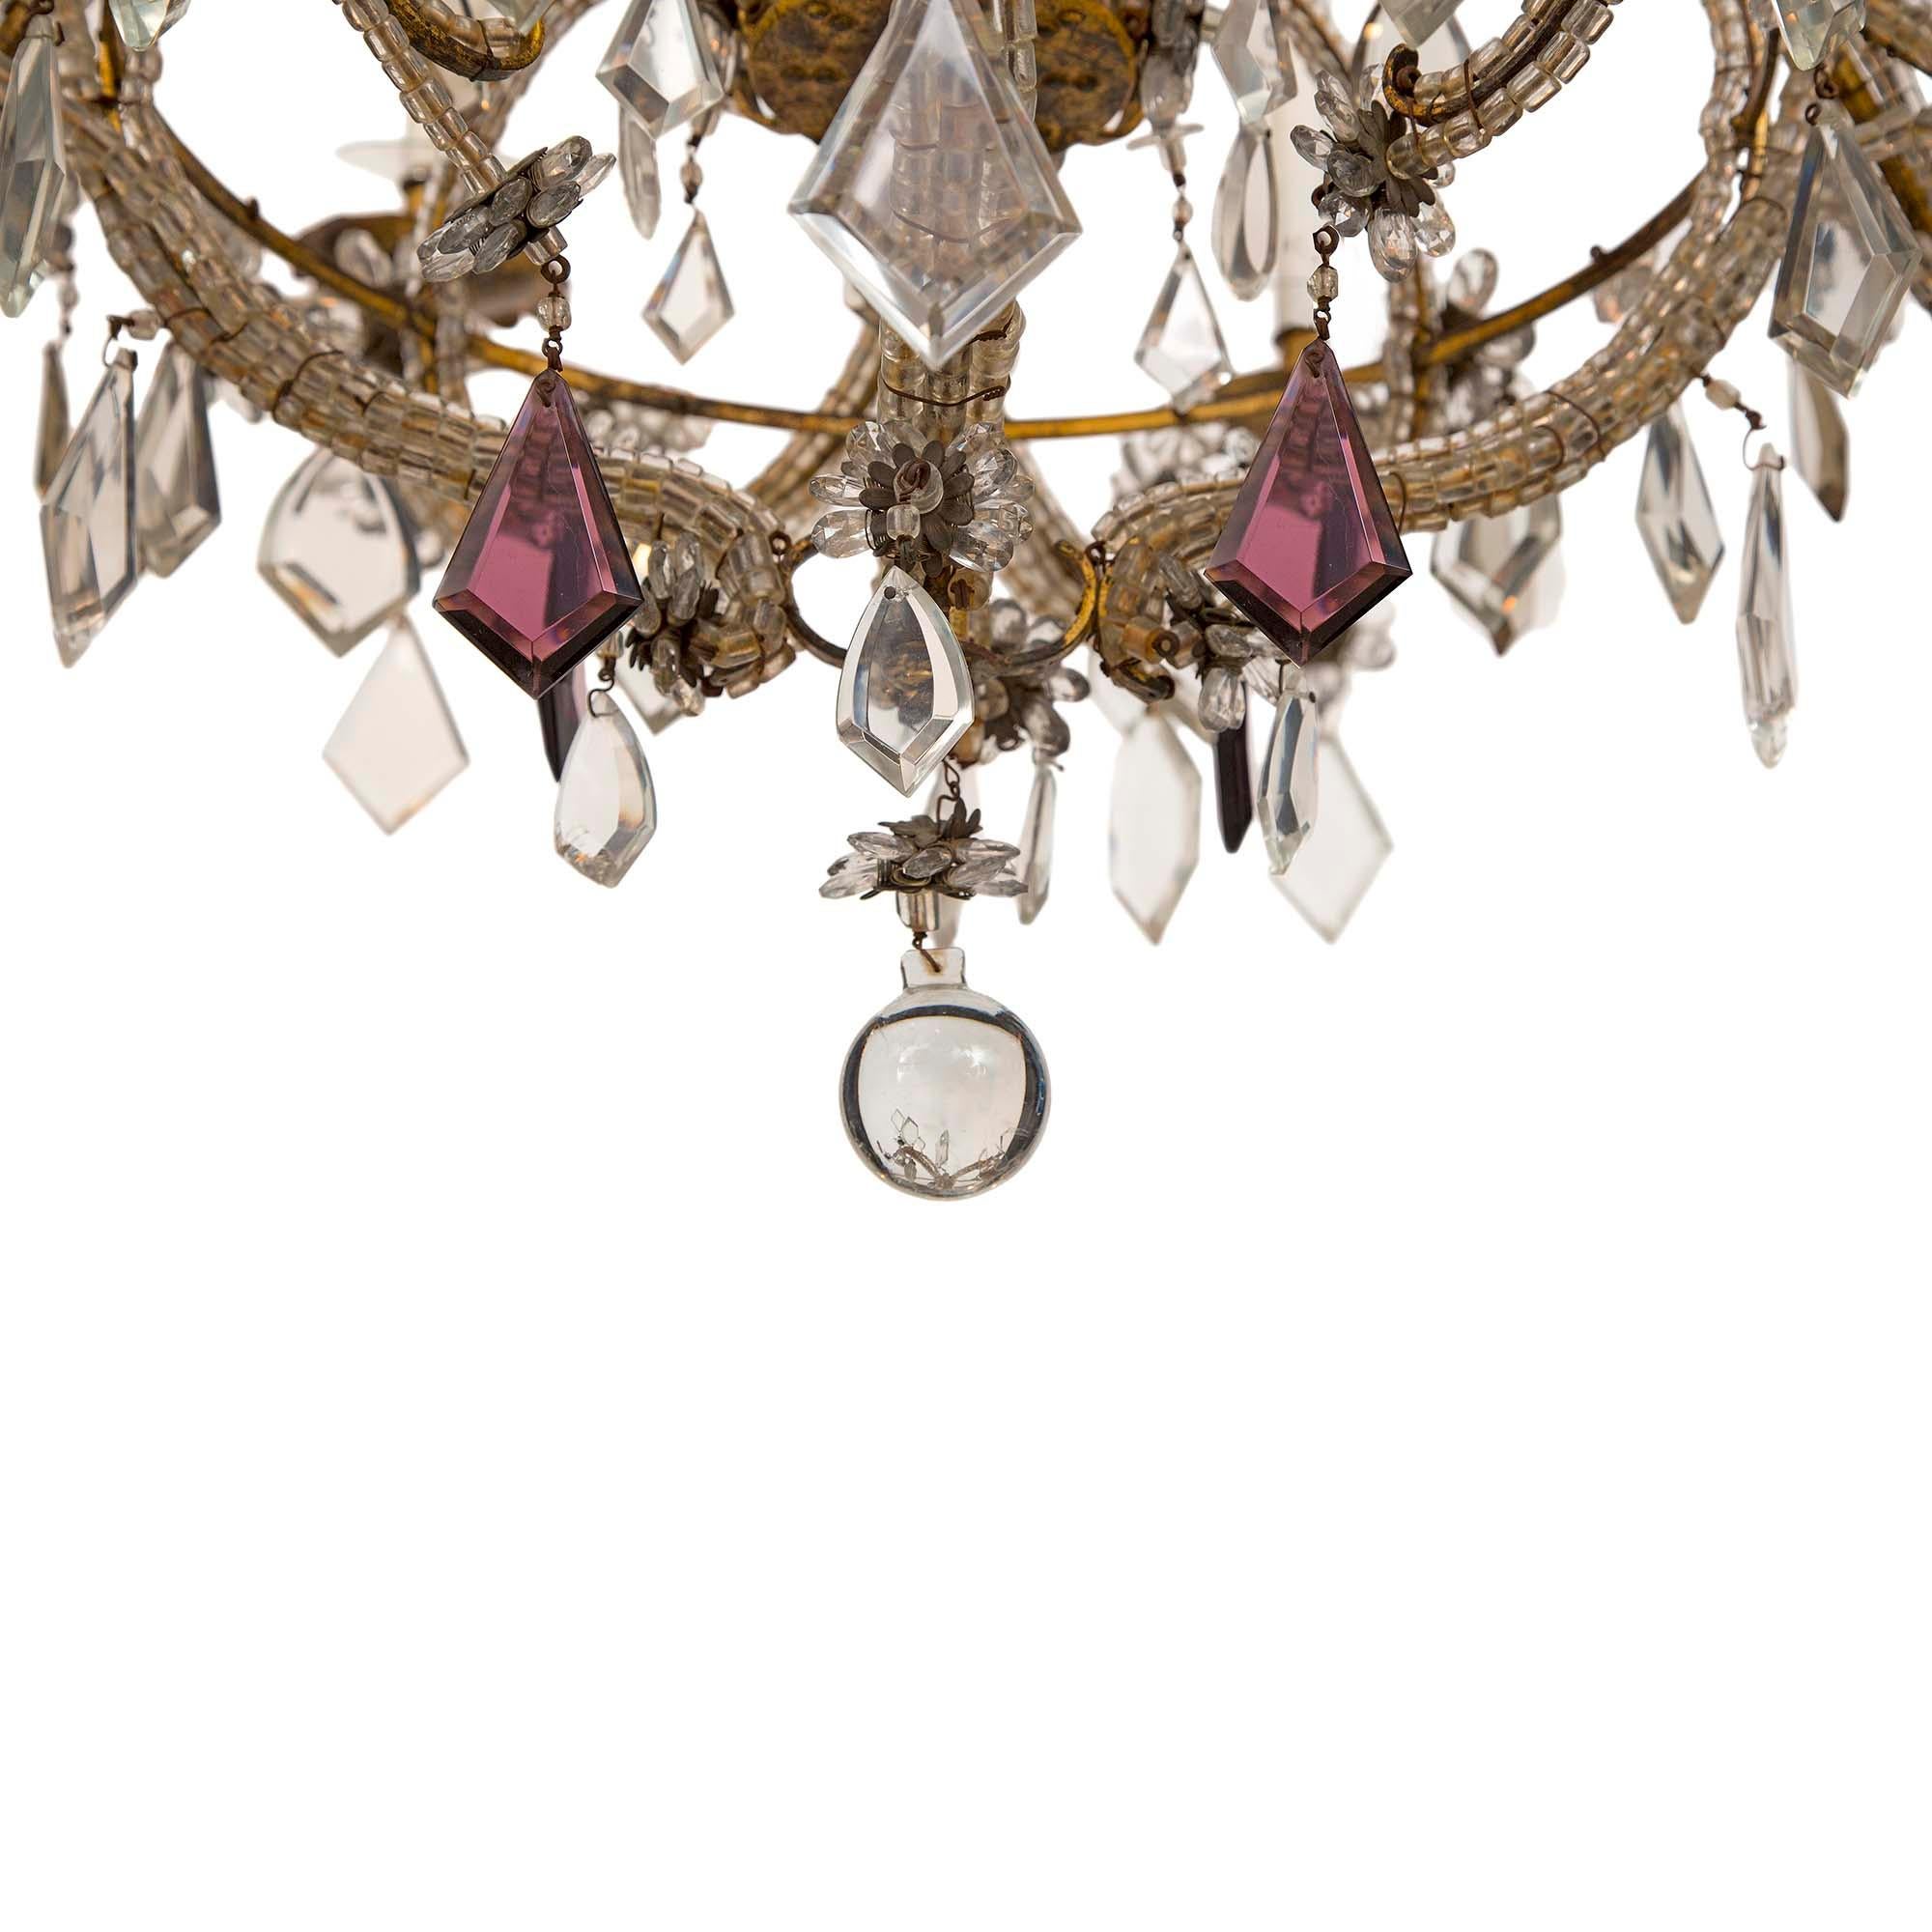  Italian 19th Century Gilt Metal, Crystal and Glass Twelve Arm Chandelier In Good Condition For Sale In West Palm Beach, FL